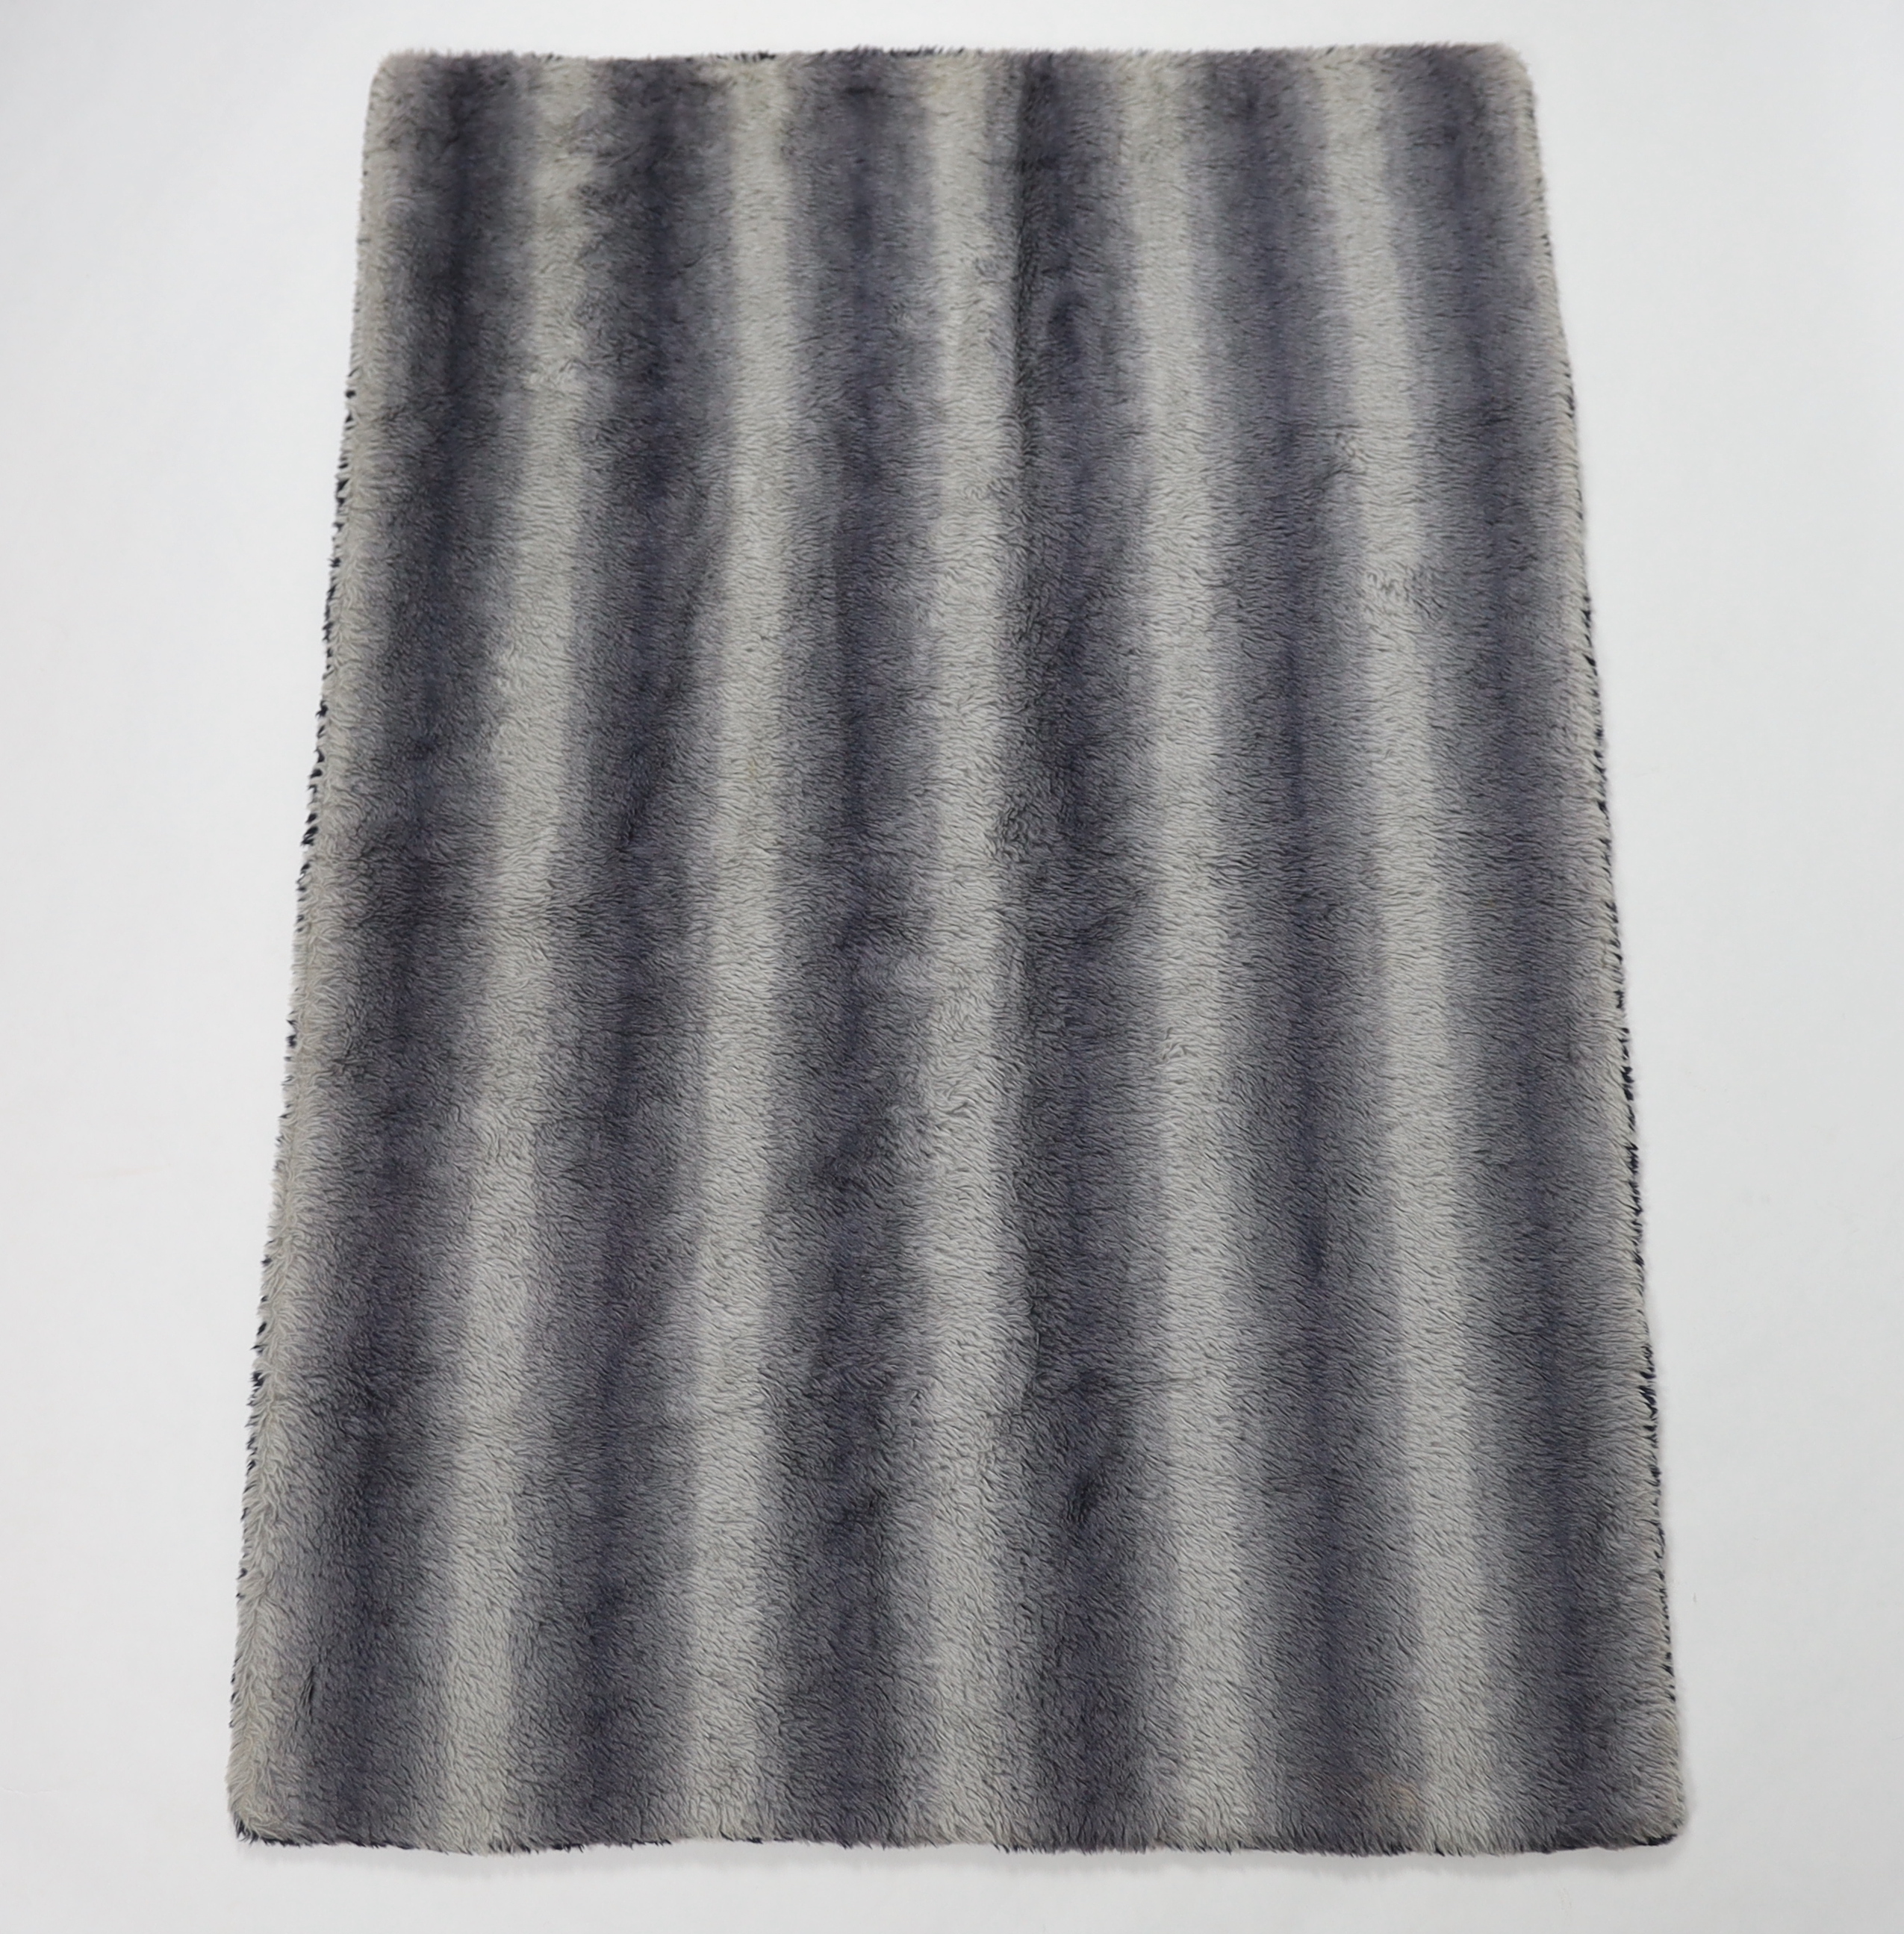 An unusual Motolux vintage car motoring rug, originally made in the 1930’s-40’s from Alpaca wool, reversible, one side navy and the other graduated grey, (the vendor remembers it keeping her warm in a Dicky seat as a chi